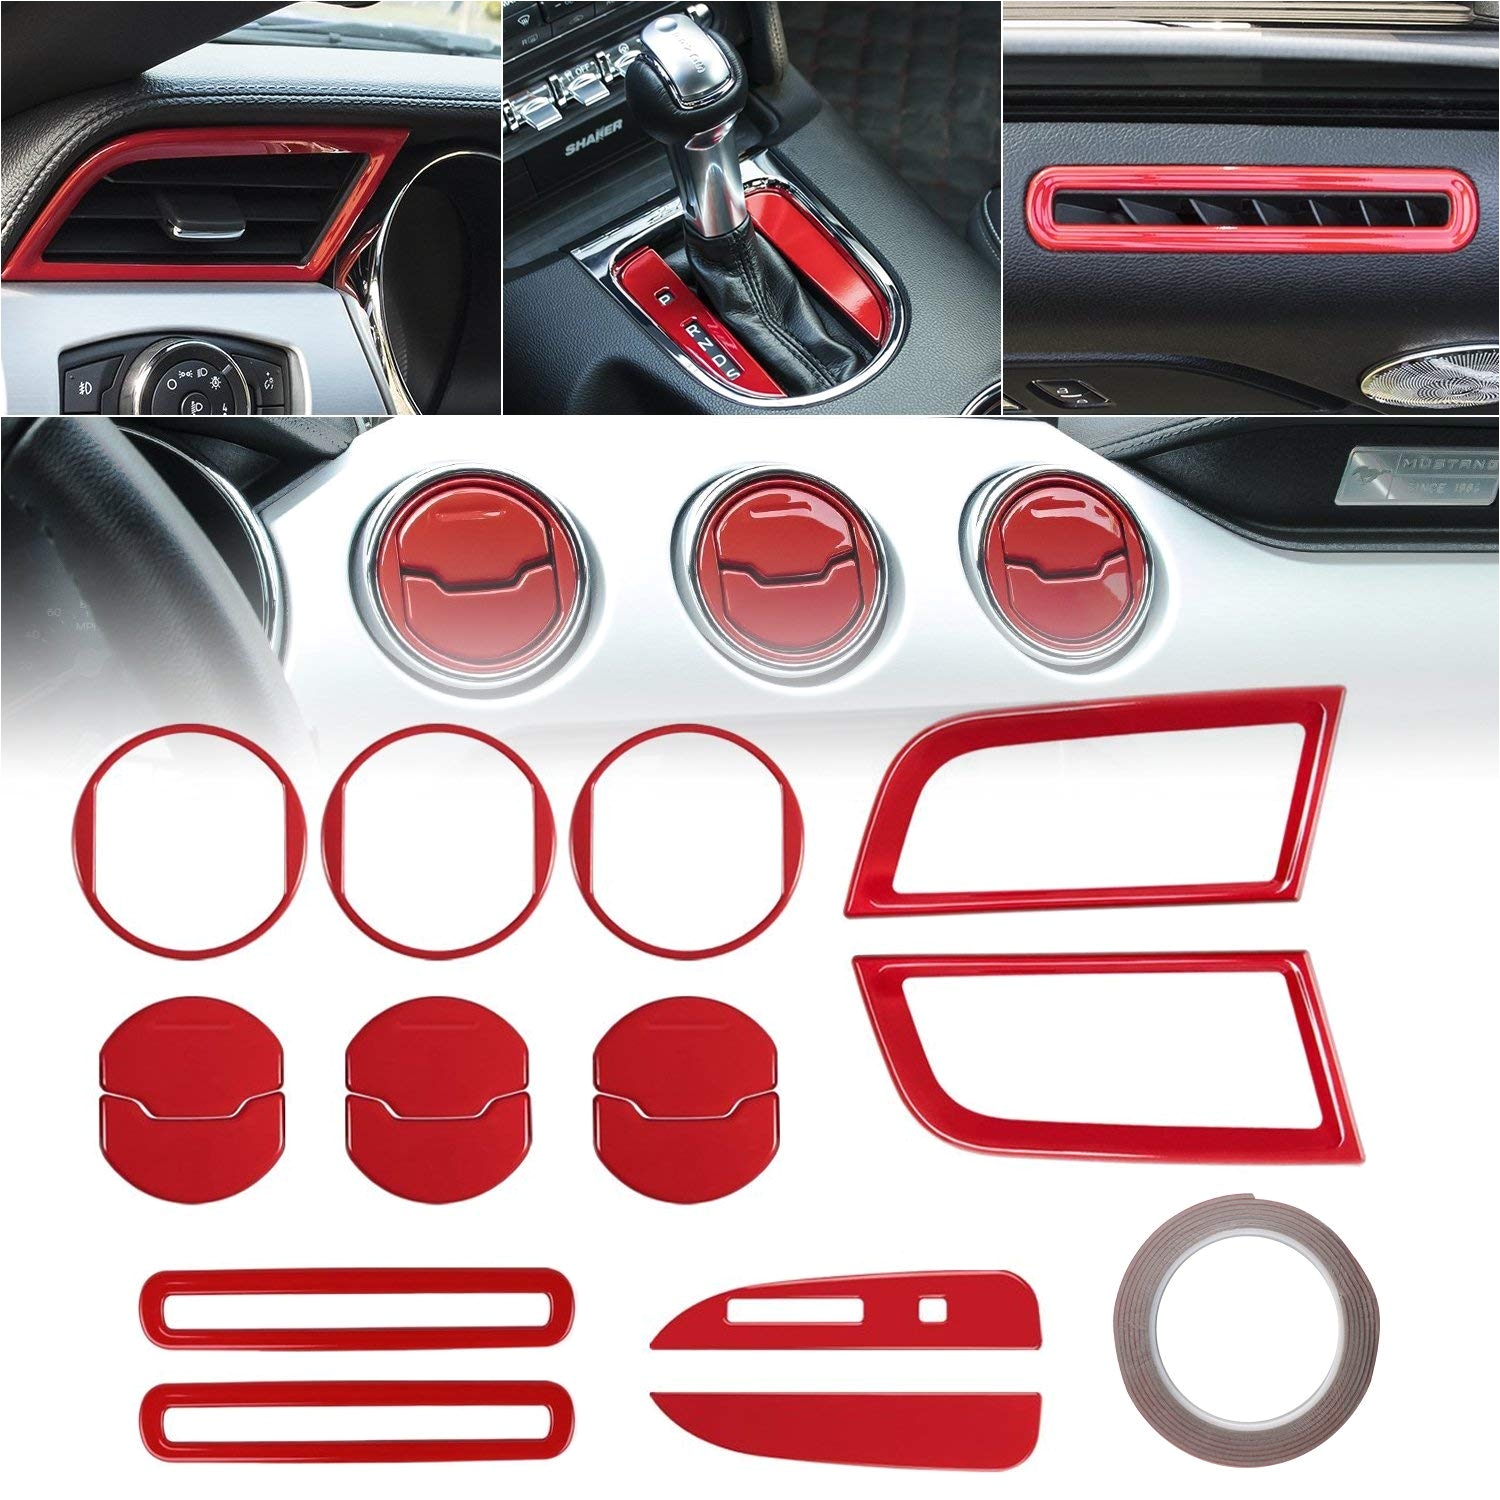 amazon com 2015 2016 2017 2018 ford mustang interior 15 pcs accessories decoration set console central door dash board side air conditioner outlet vent